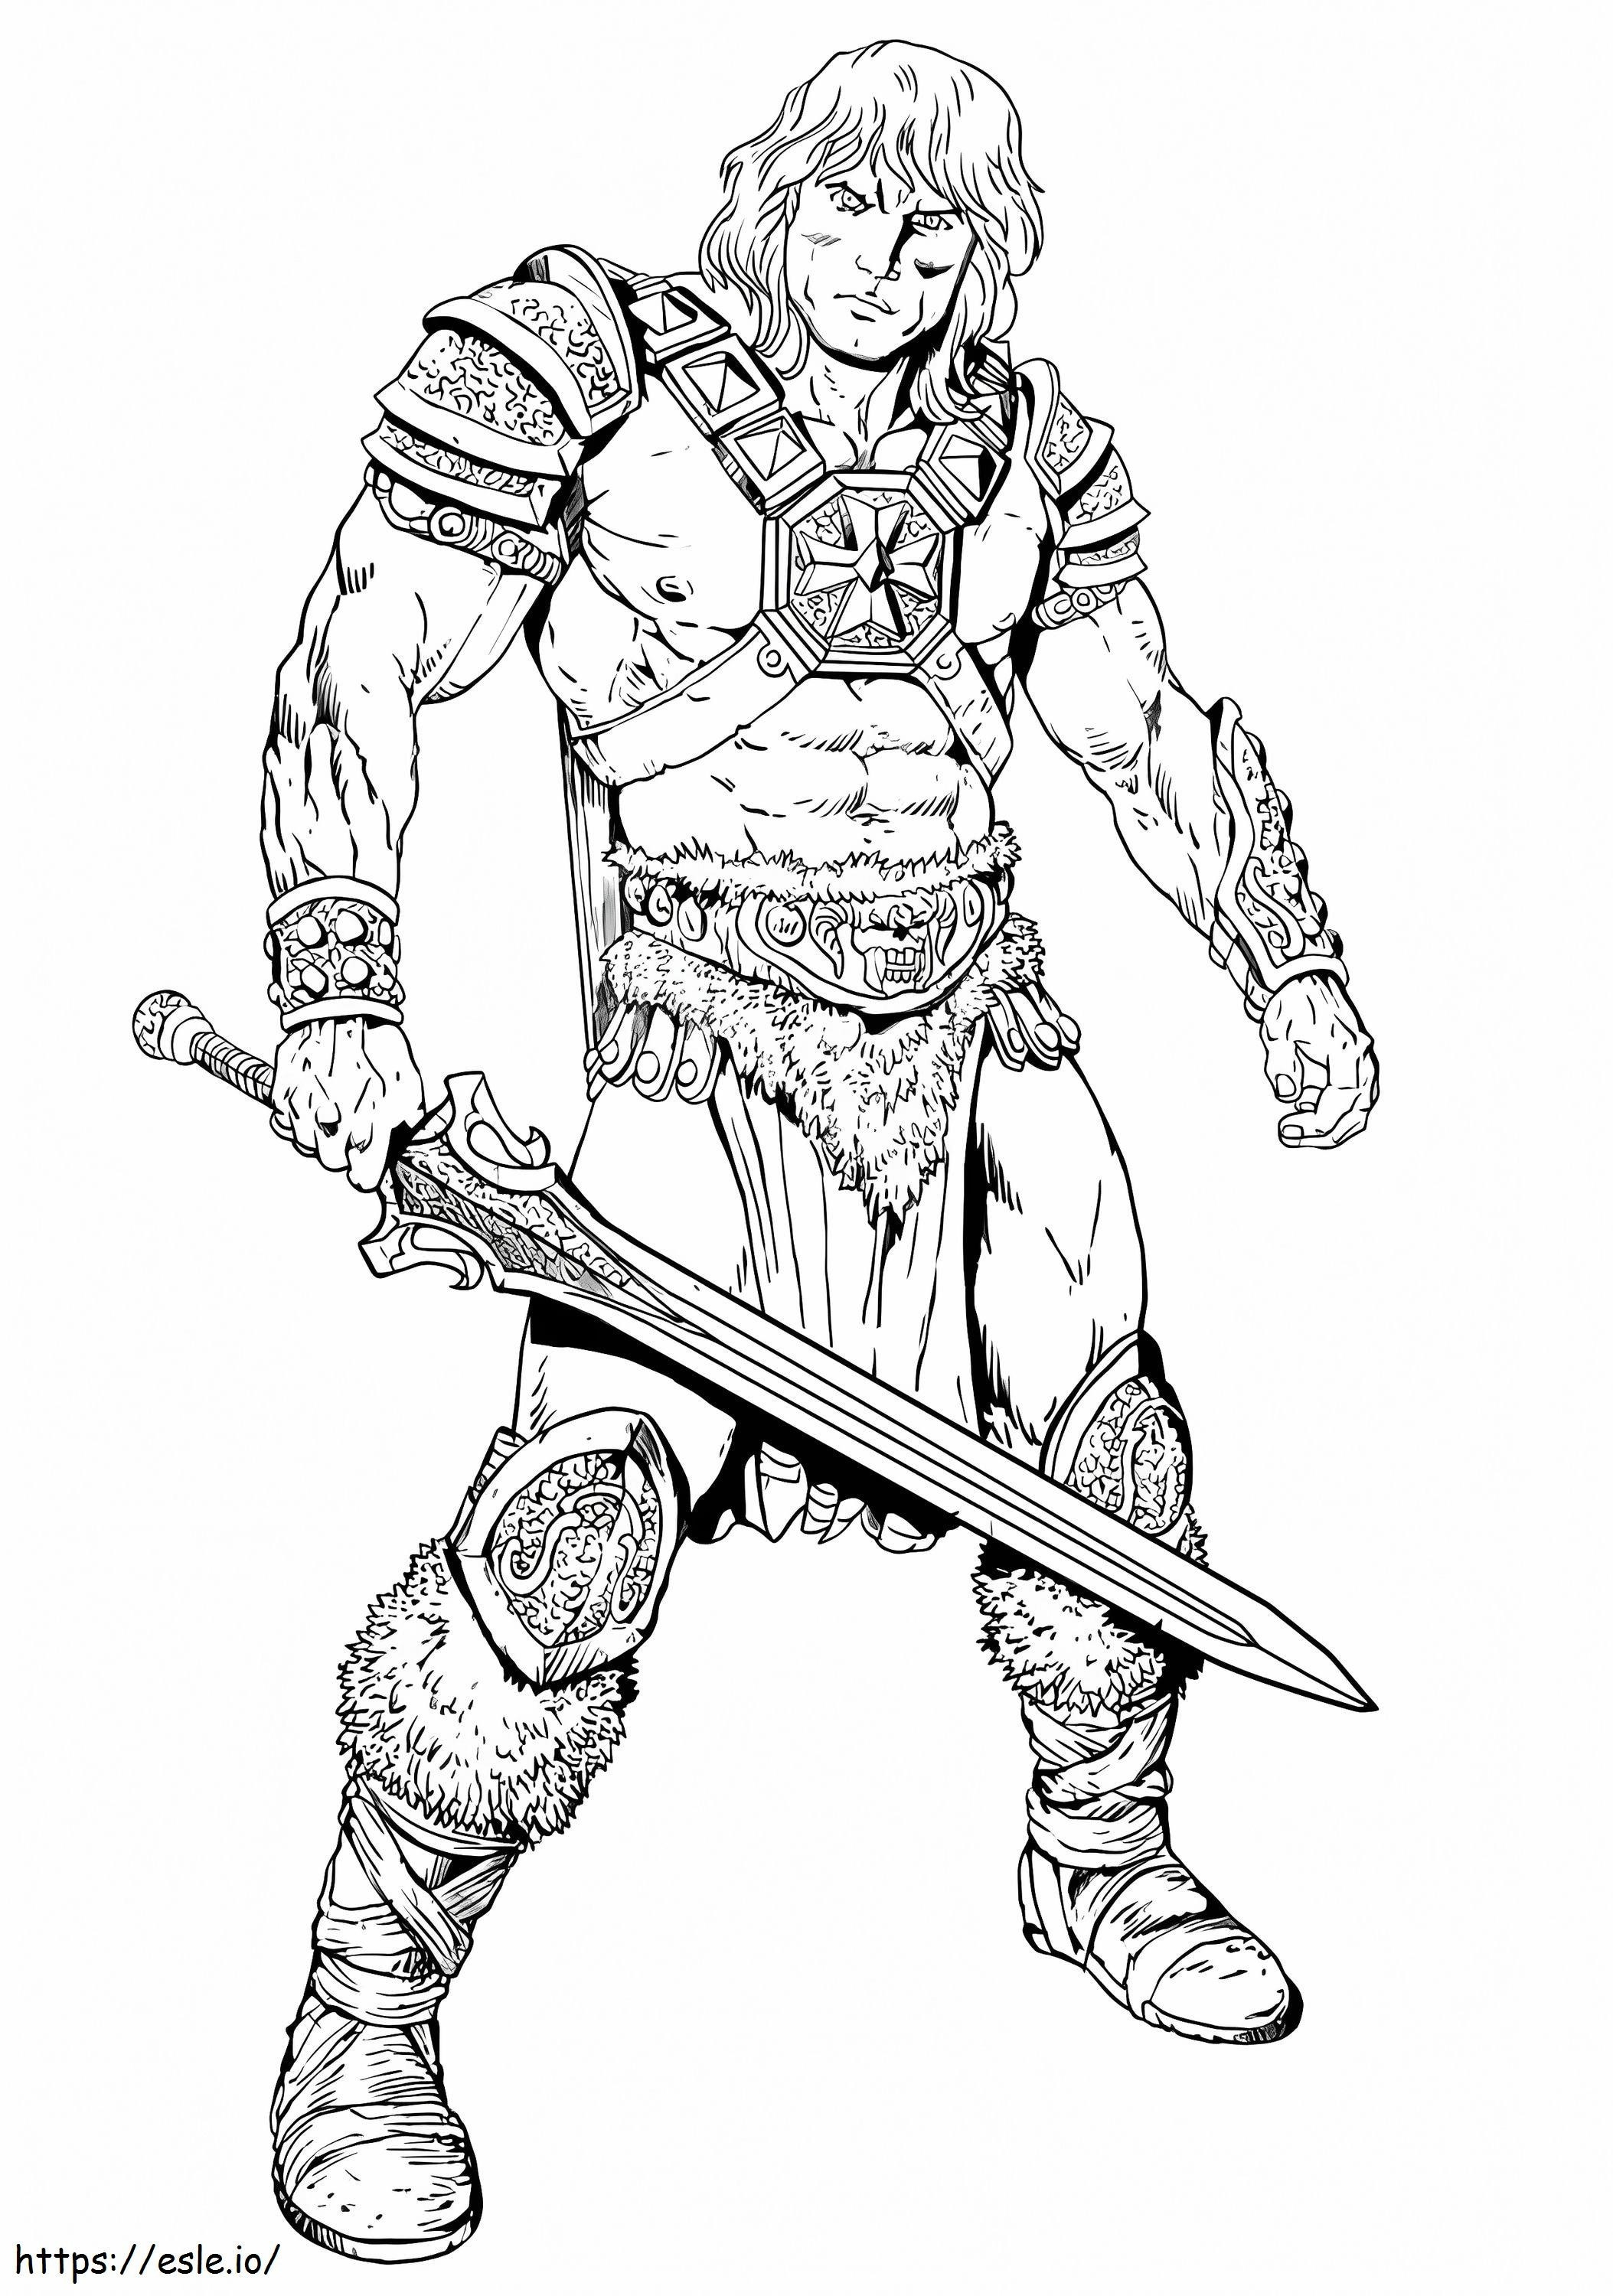 Awesome He Man coloring page